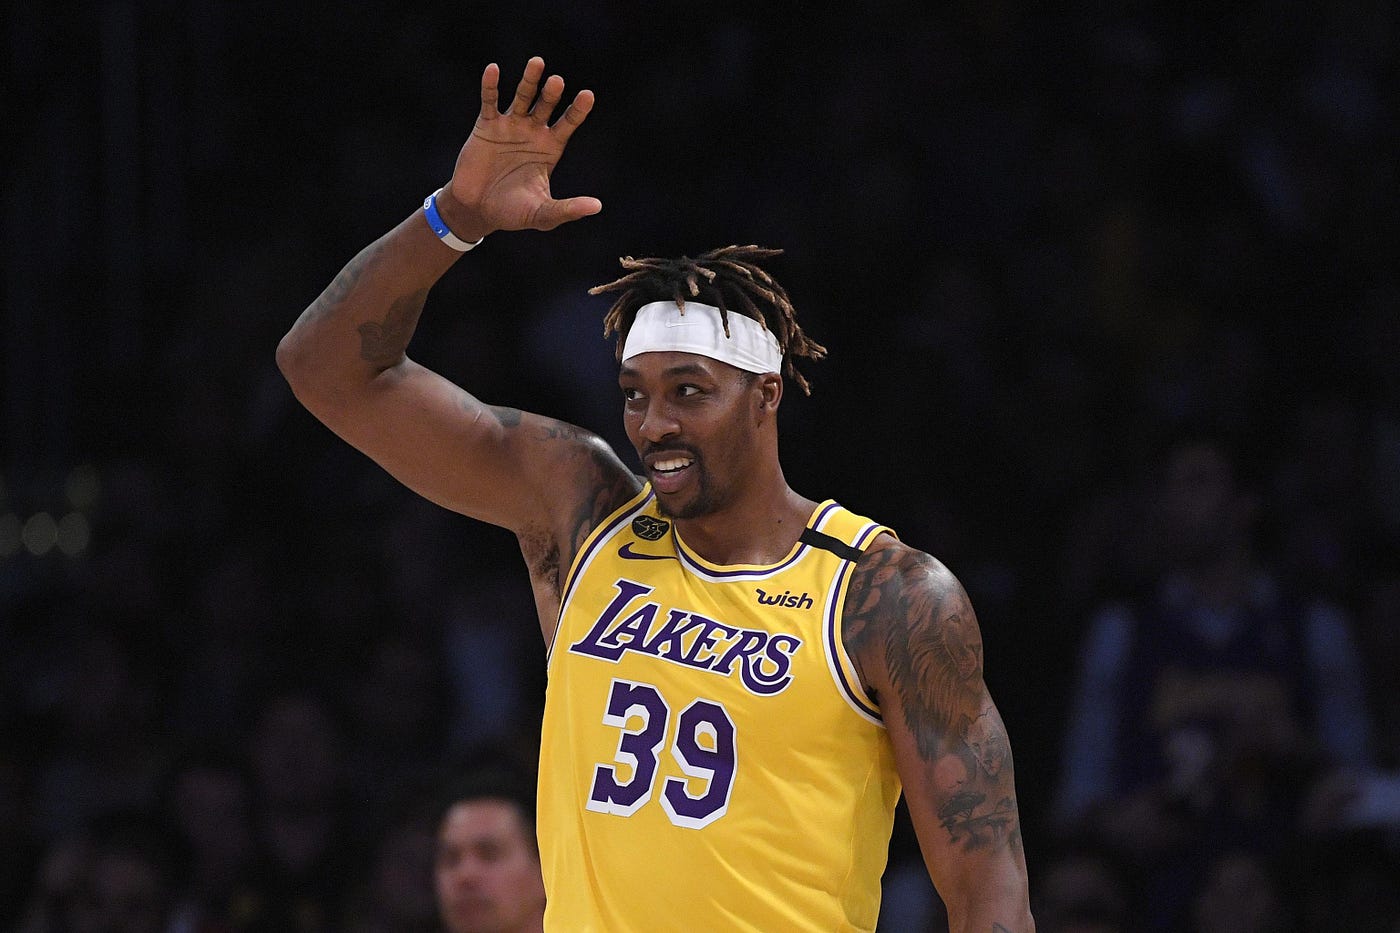 Dwight Howard brings energy to Lakers' bench, while trying to